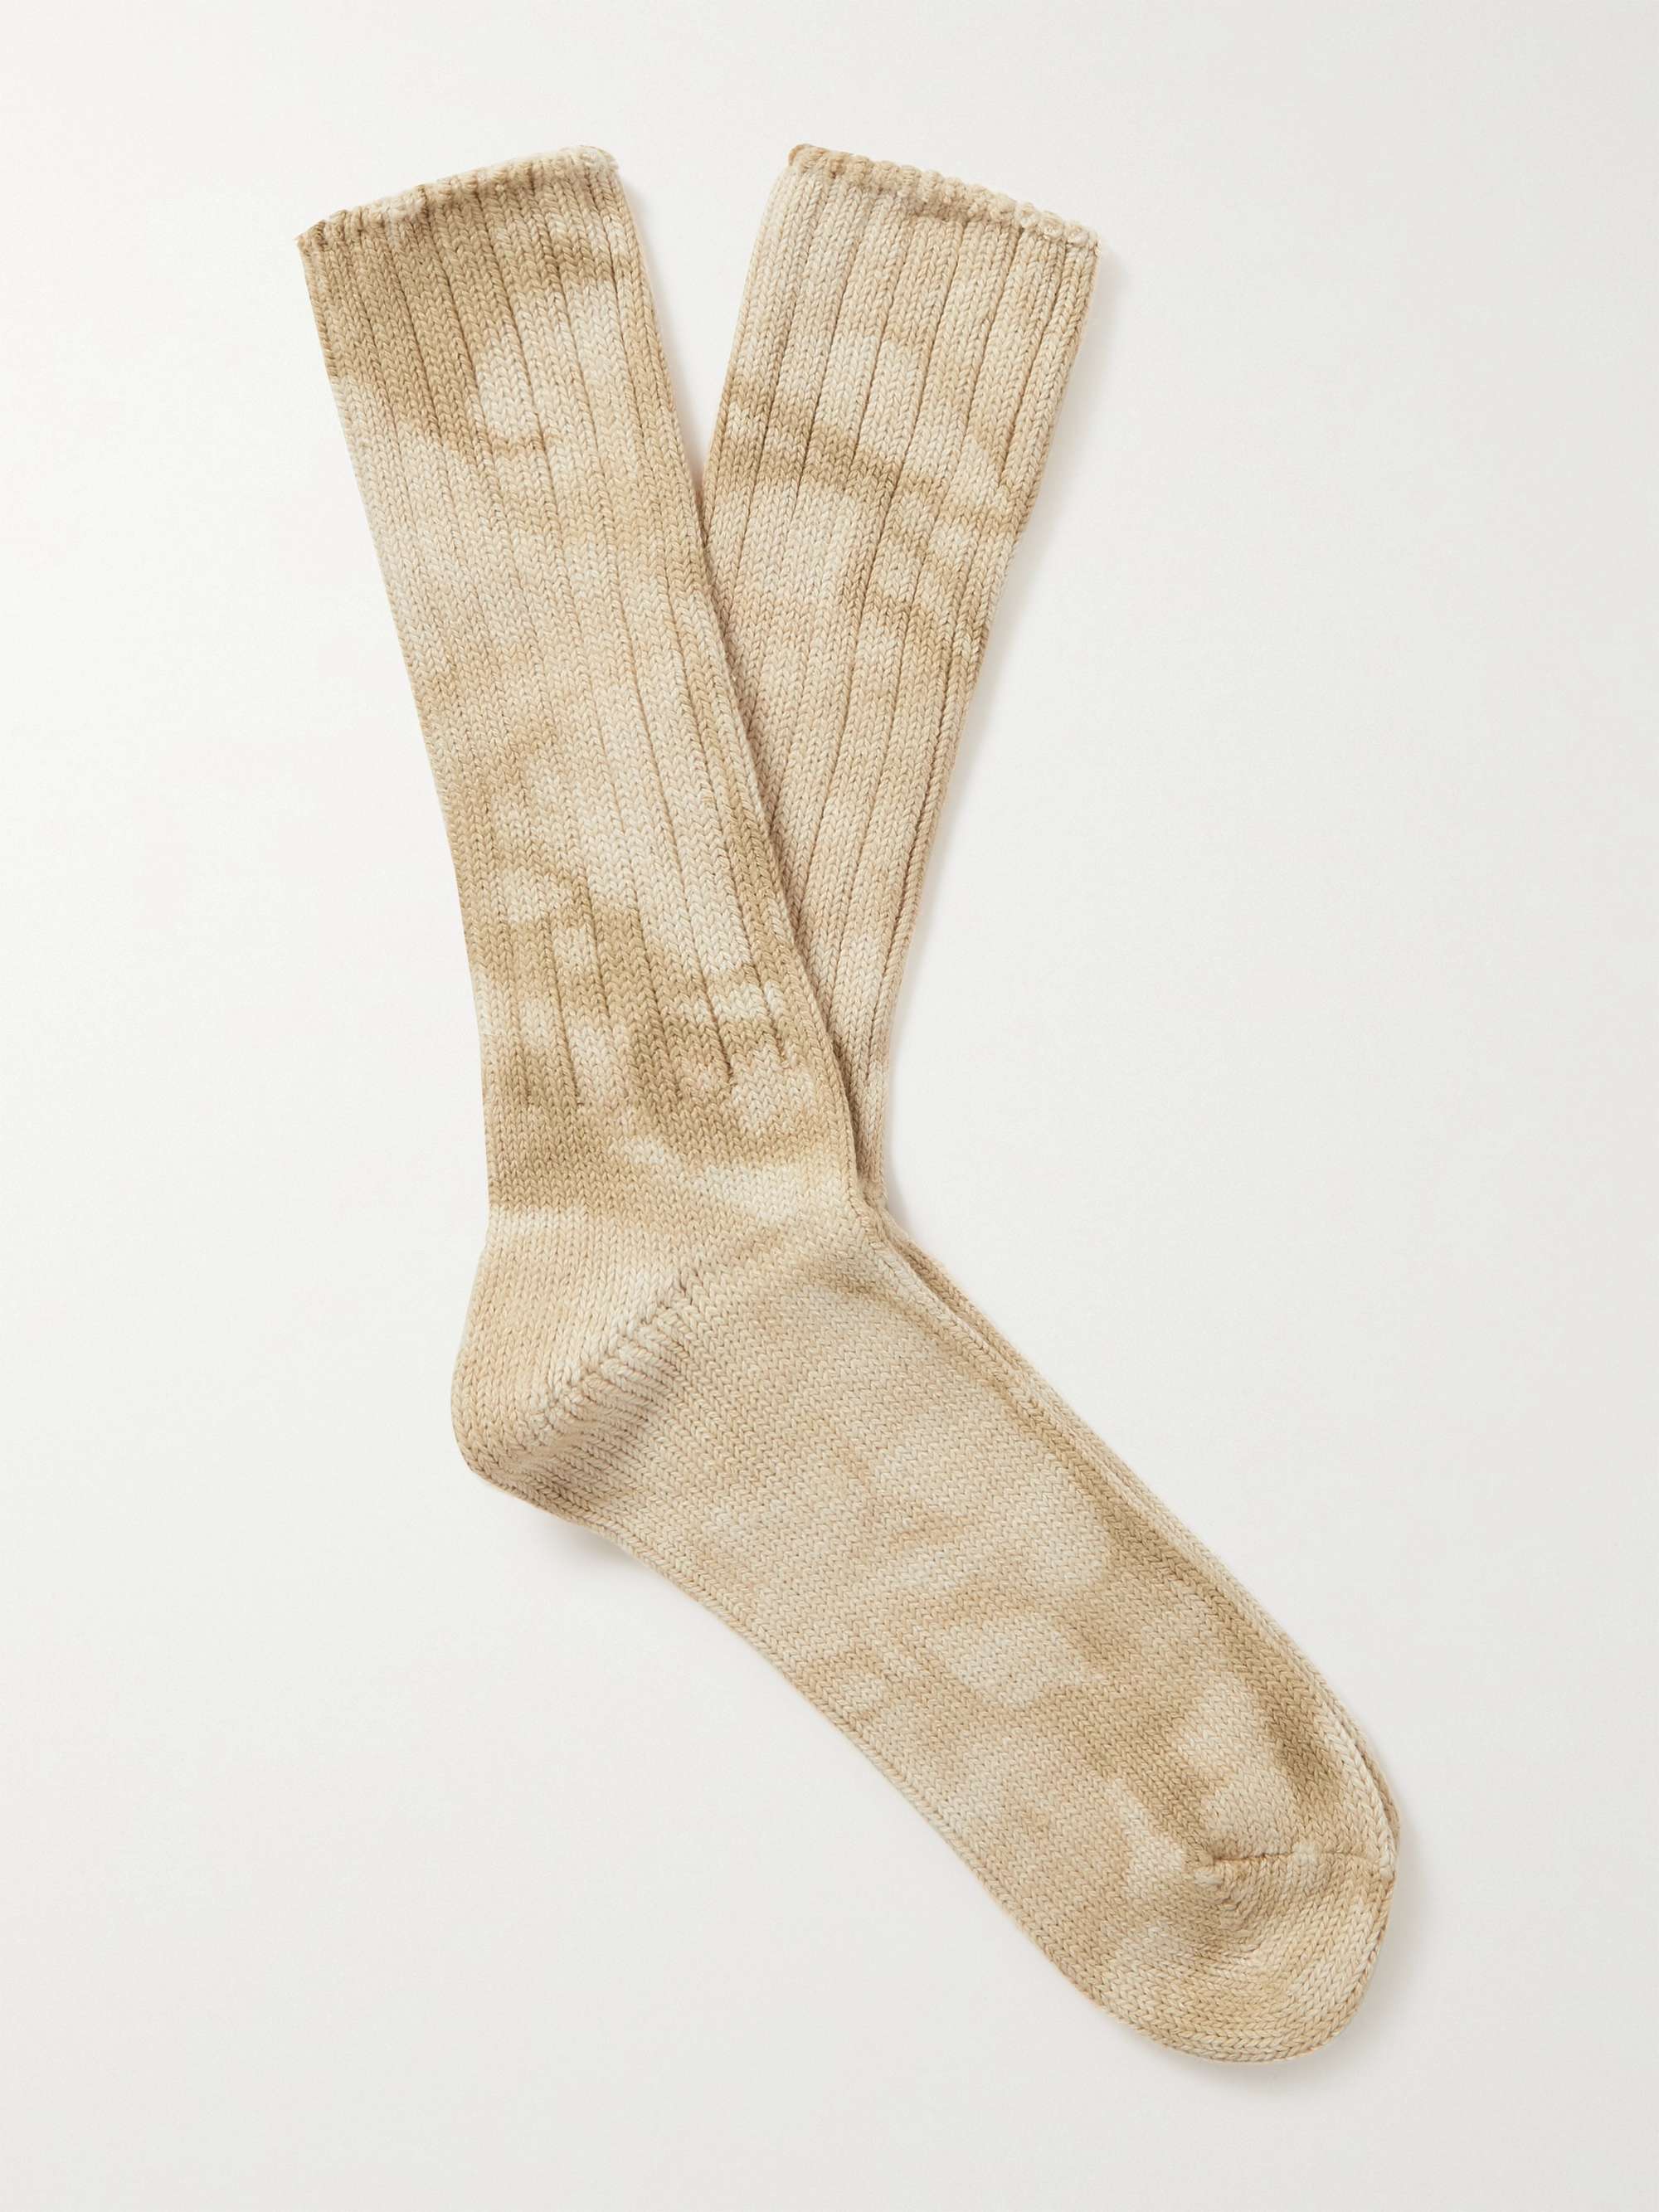 ANONYMOUS ISM GOHEMP Ribbed Tie-Dyed Cotton-Blend Socks